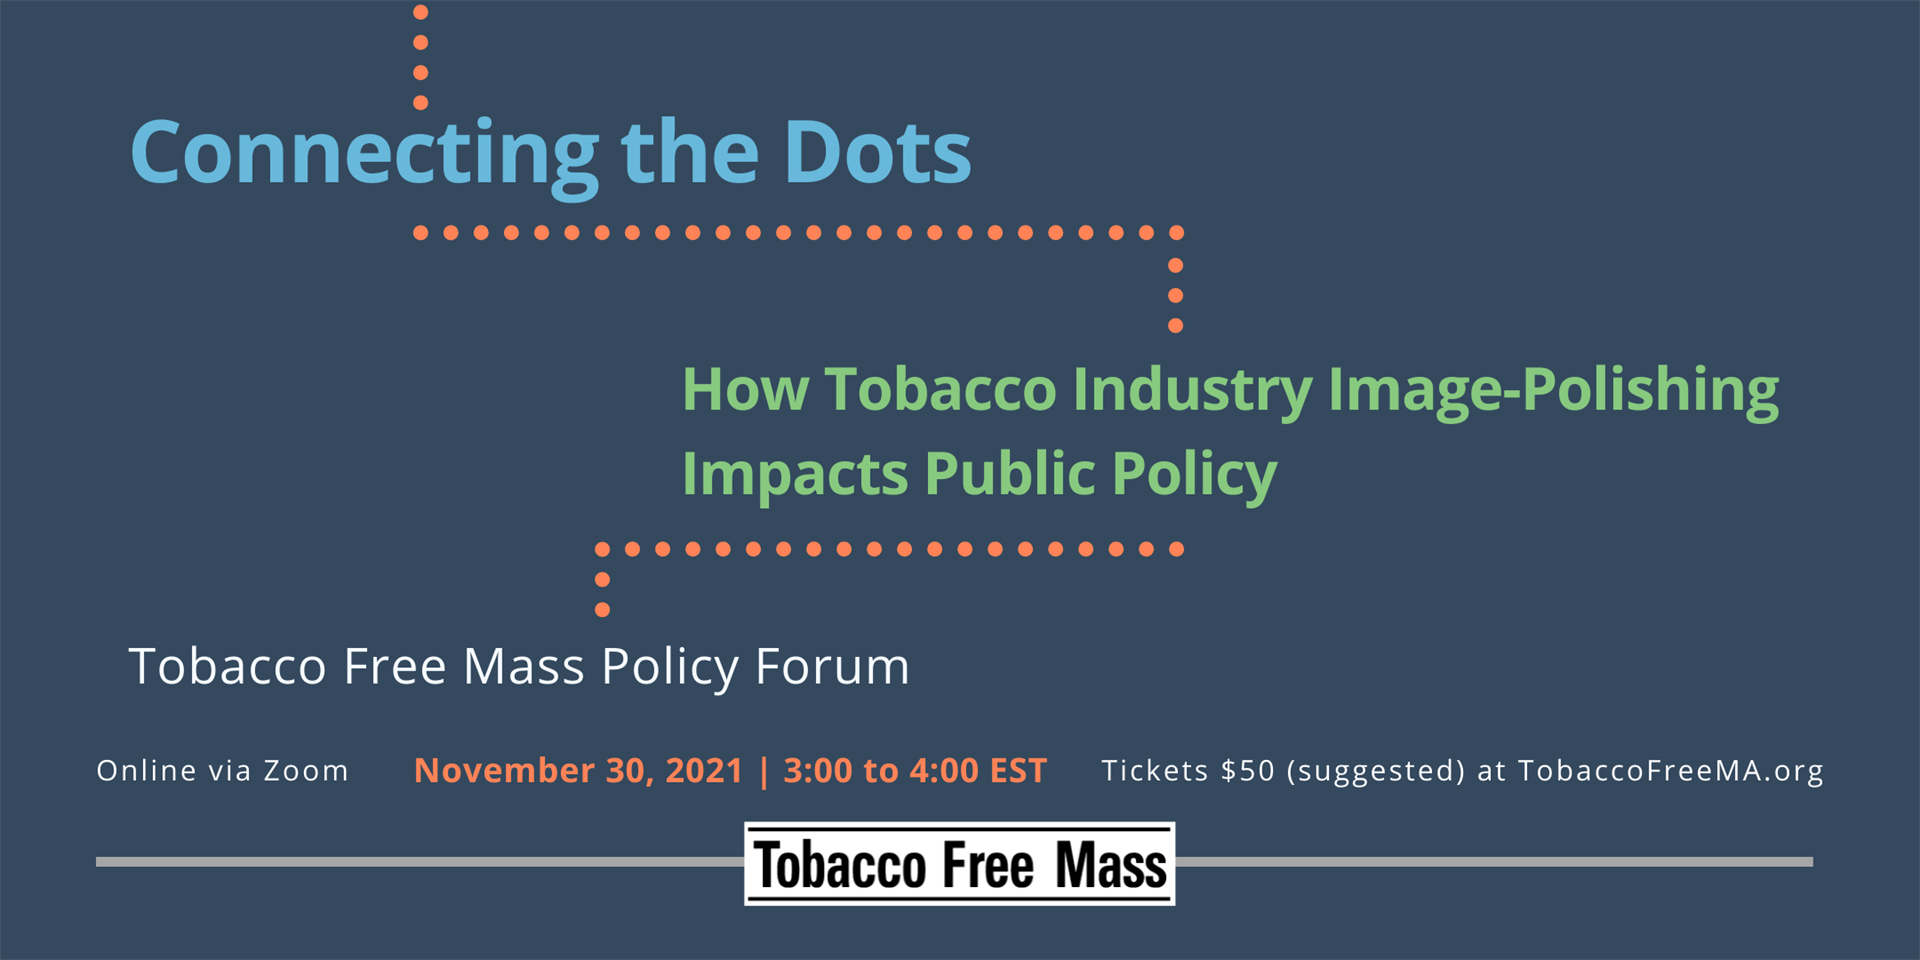 Connecting the Dots: How Tobacco Industry Image-Polishing Impacts Public Policy: Tobacco Free Mass Policy Forum. Online via Zoom. November 30, 2021; 3:00-4:00 EST